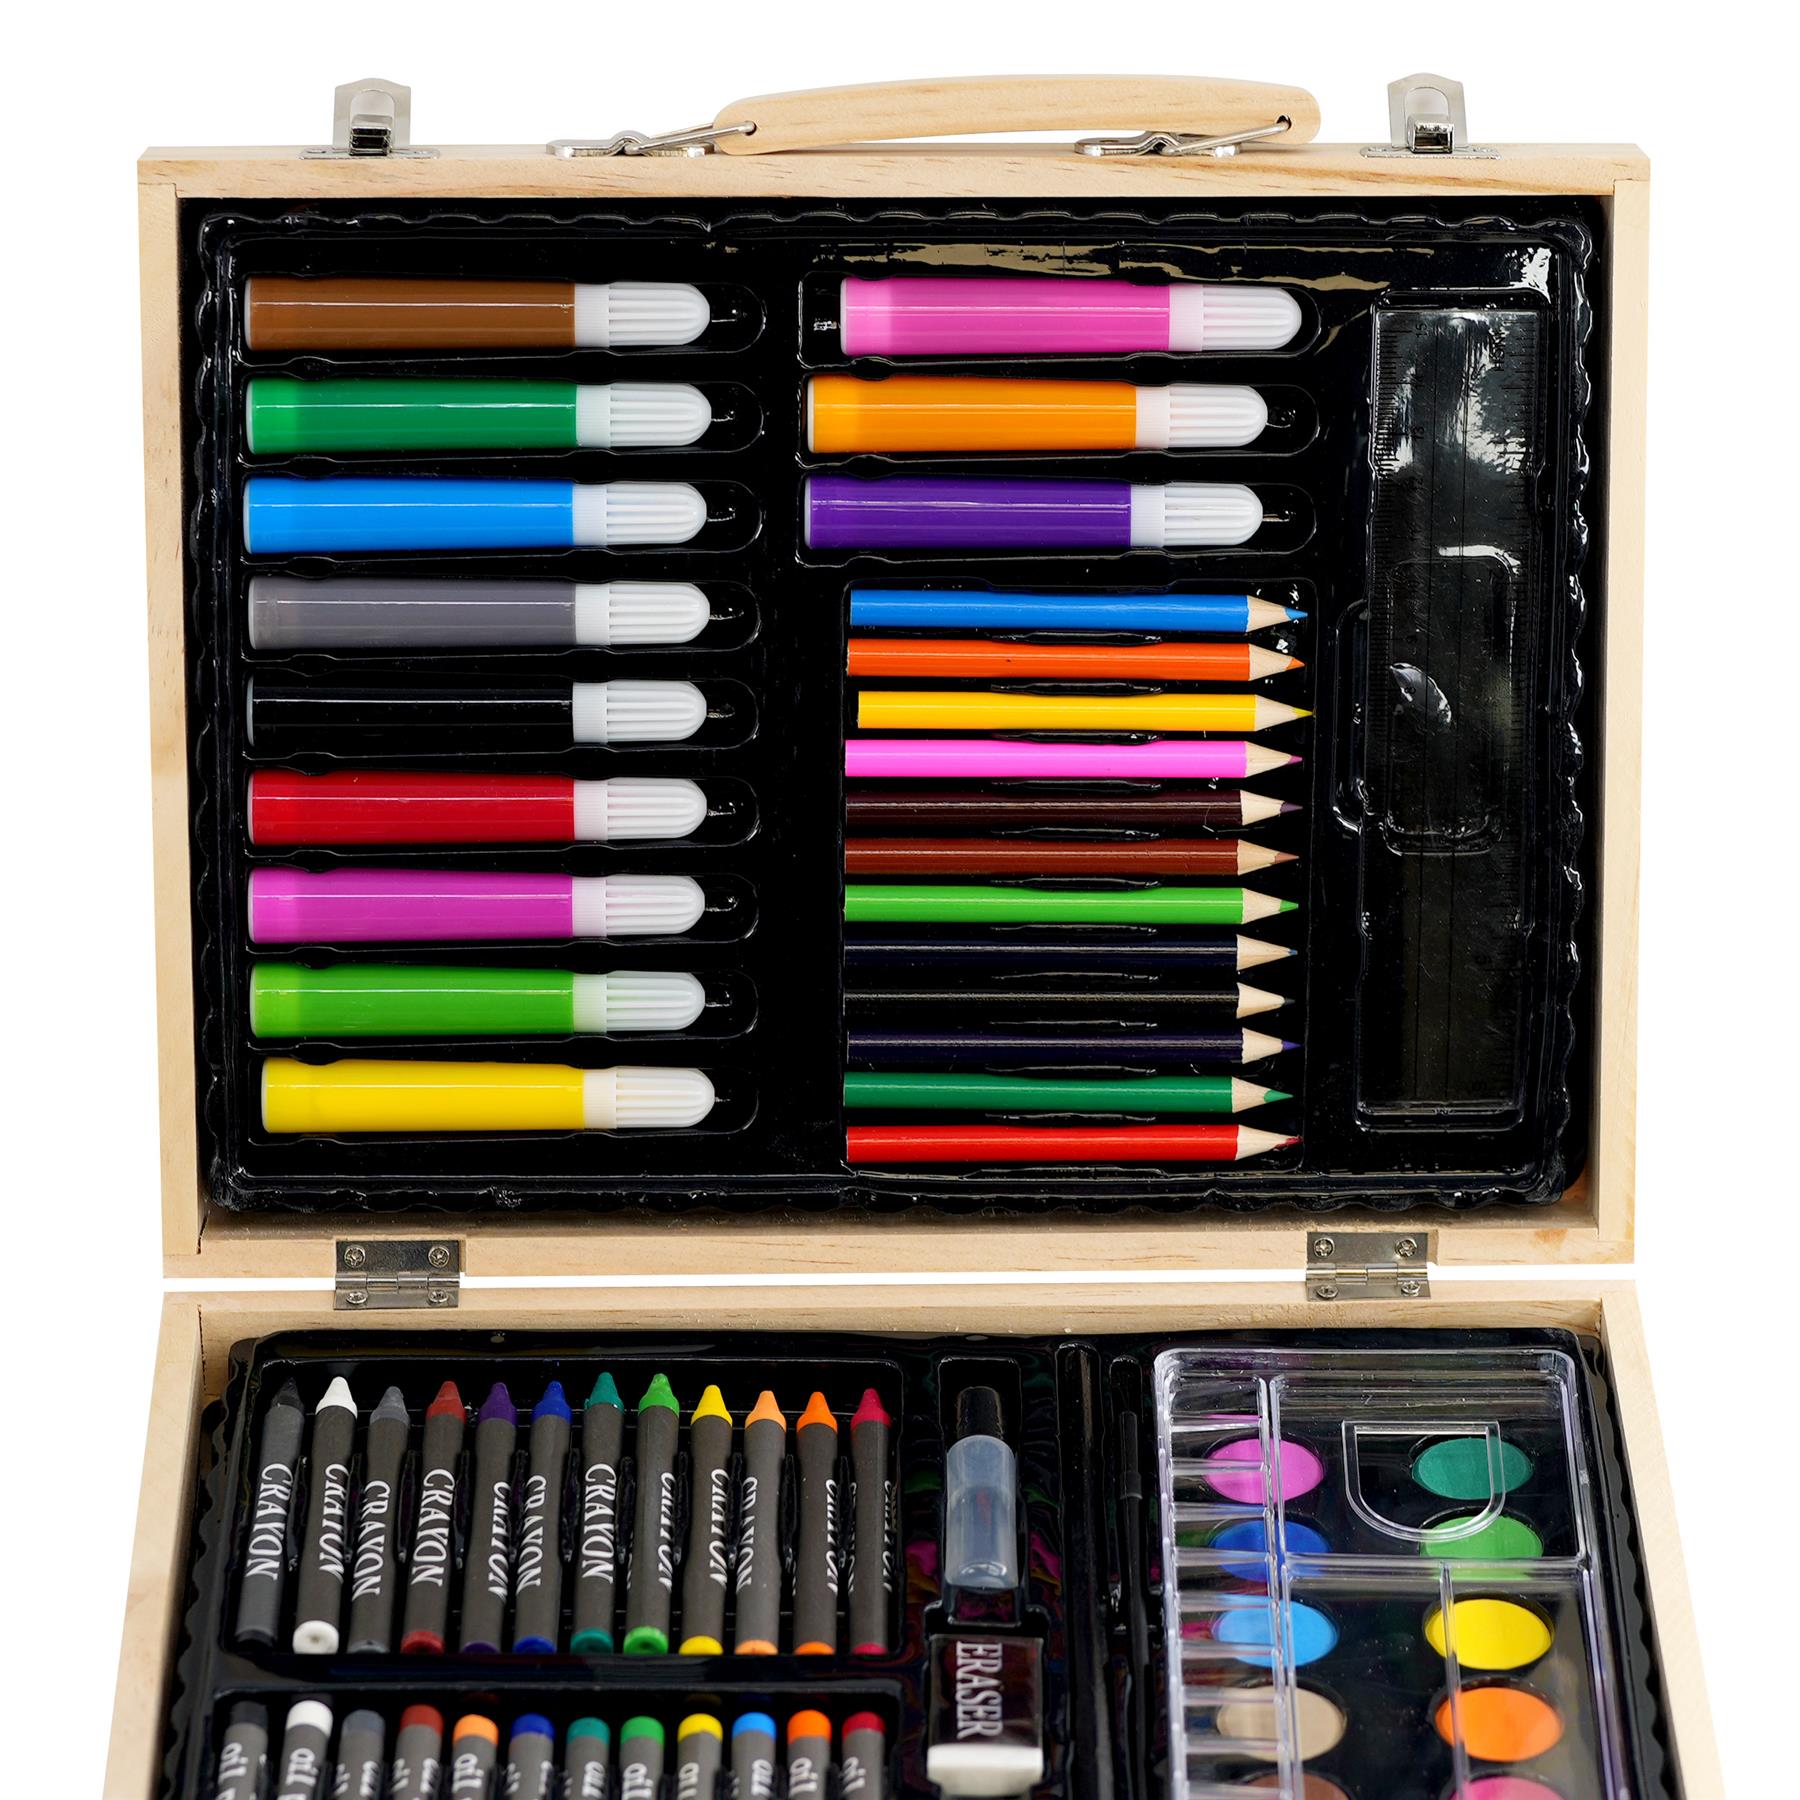 67 Pieces Art Set in a Wooden Case by The Magic Toy Shop - UKBuyZone